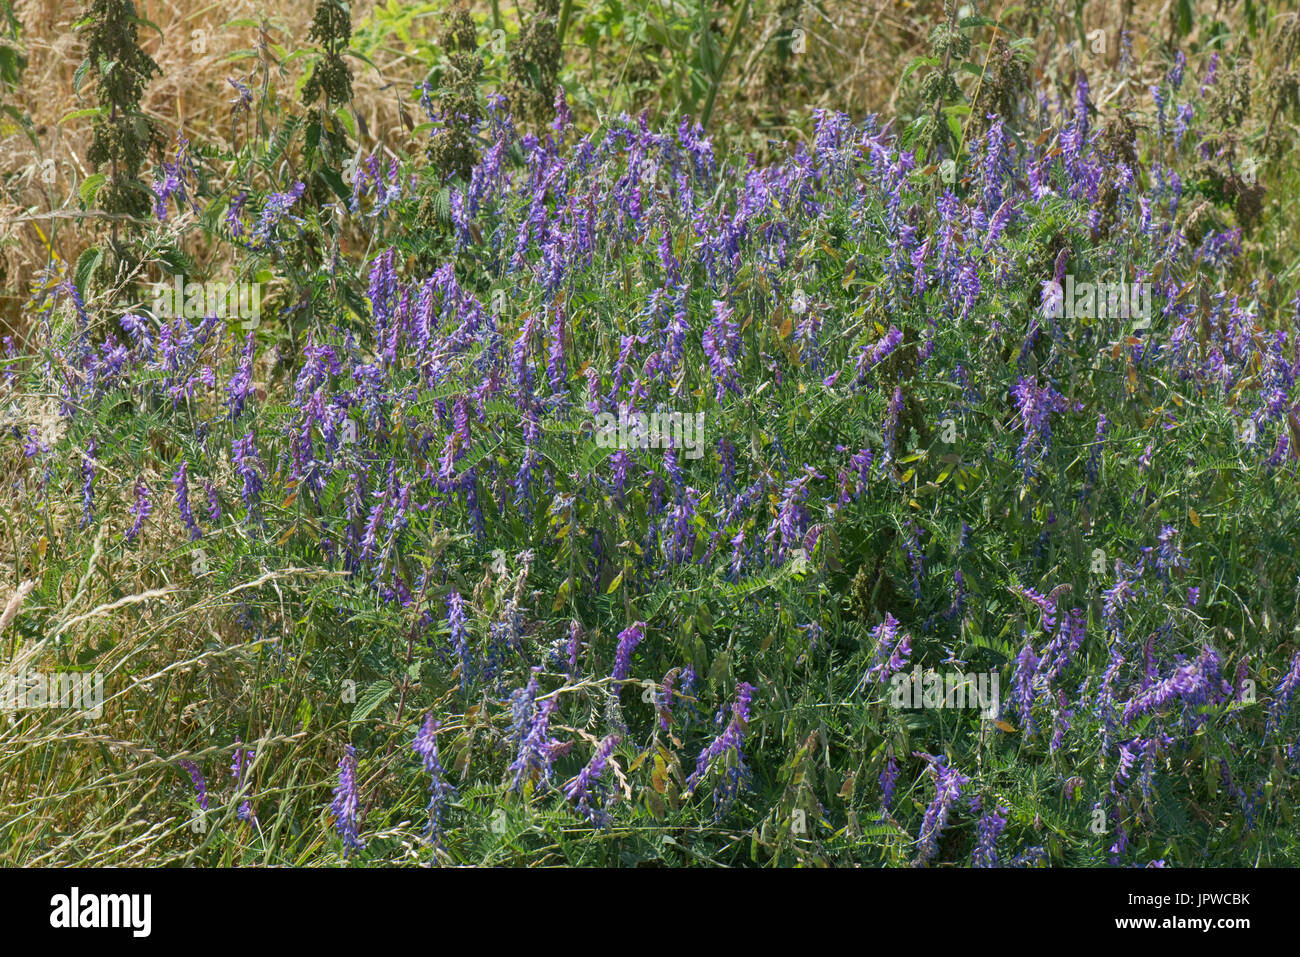 Tufted vetch, Vicia cracca, plant with profuse blue purple flowers on downland, Berkshire, July Stock Photo